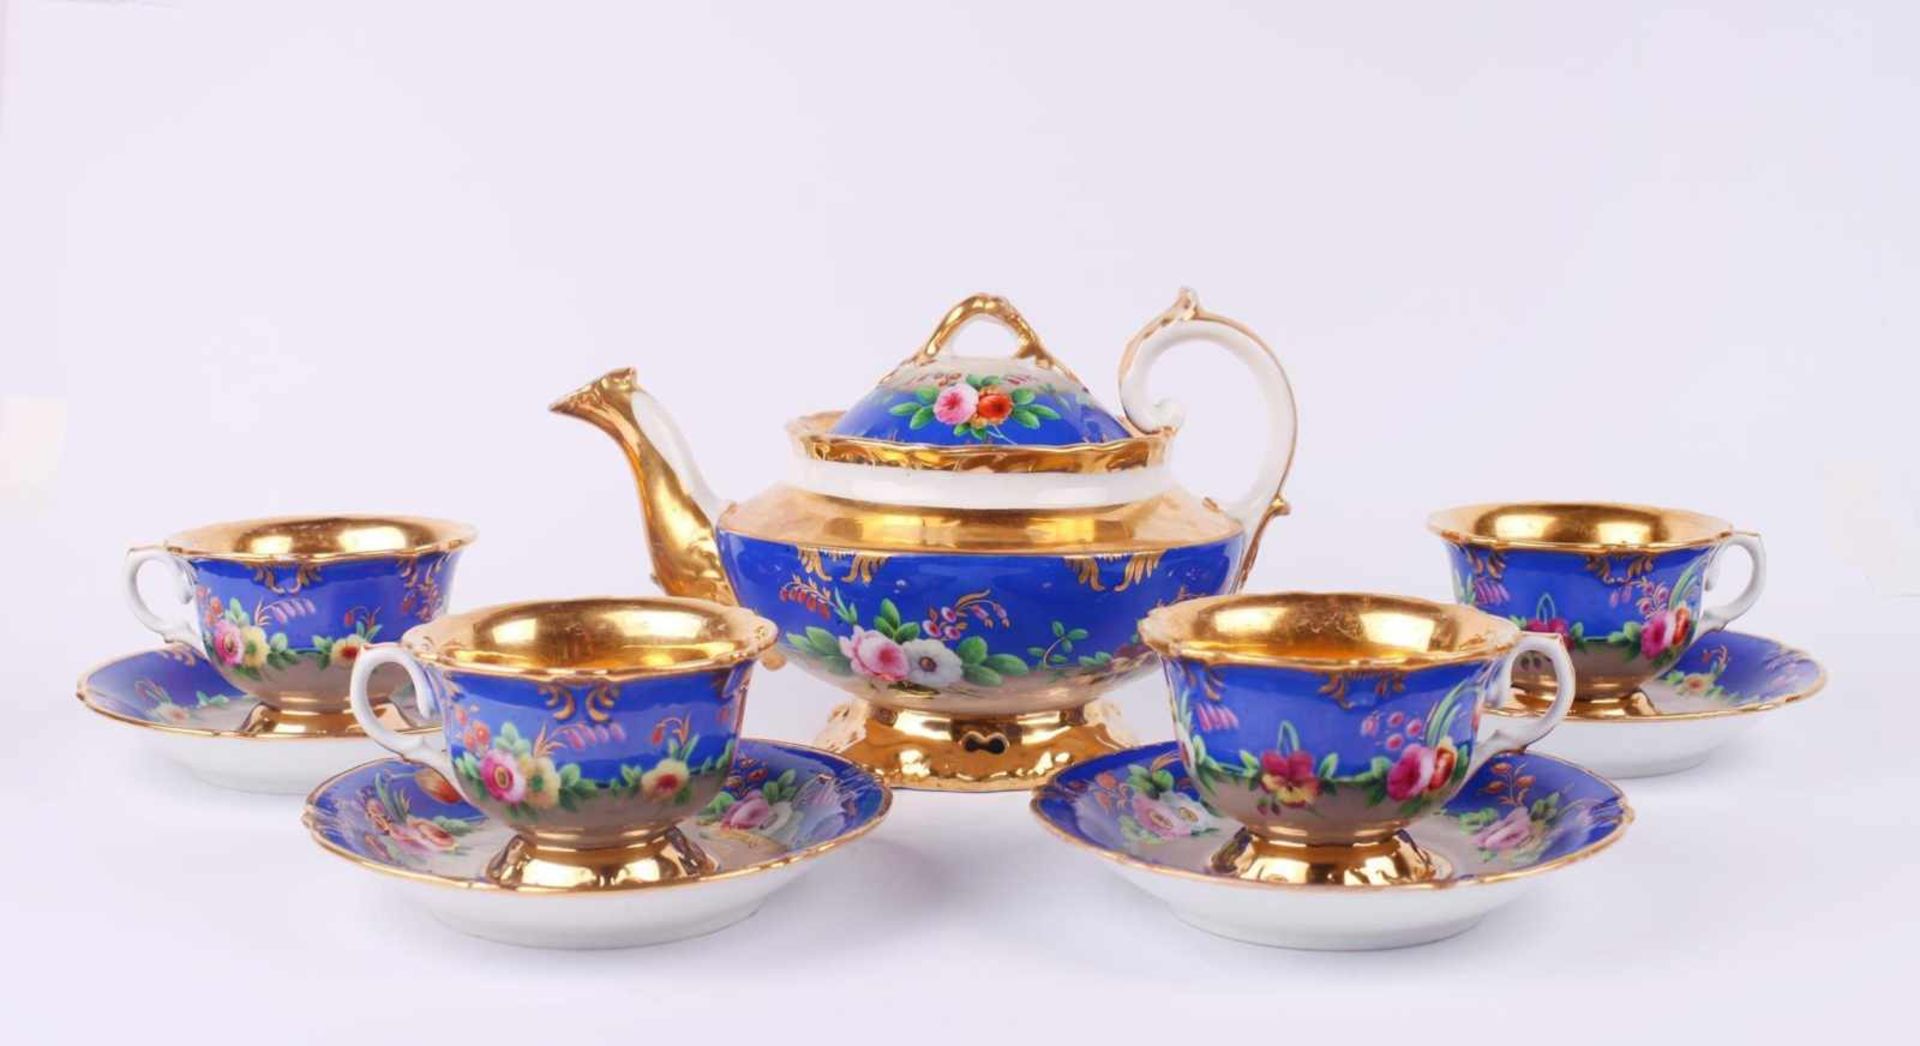 Tea set. 16 pieces: six tea cup and saucer sets, one teapot, one sugar bowl, one milk jug, one dish. - Image 2 of 27